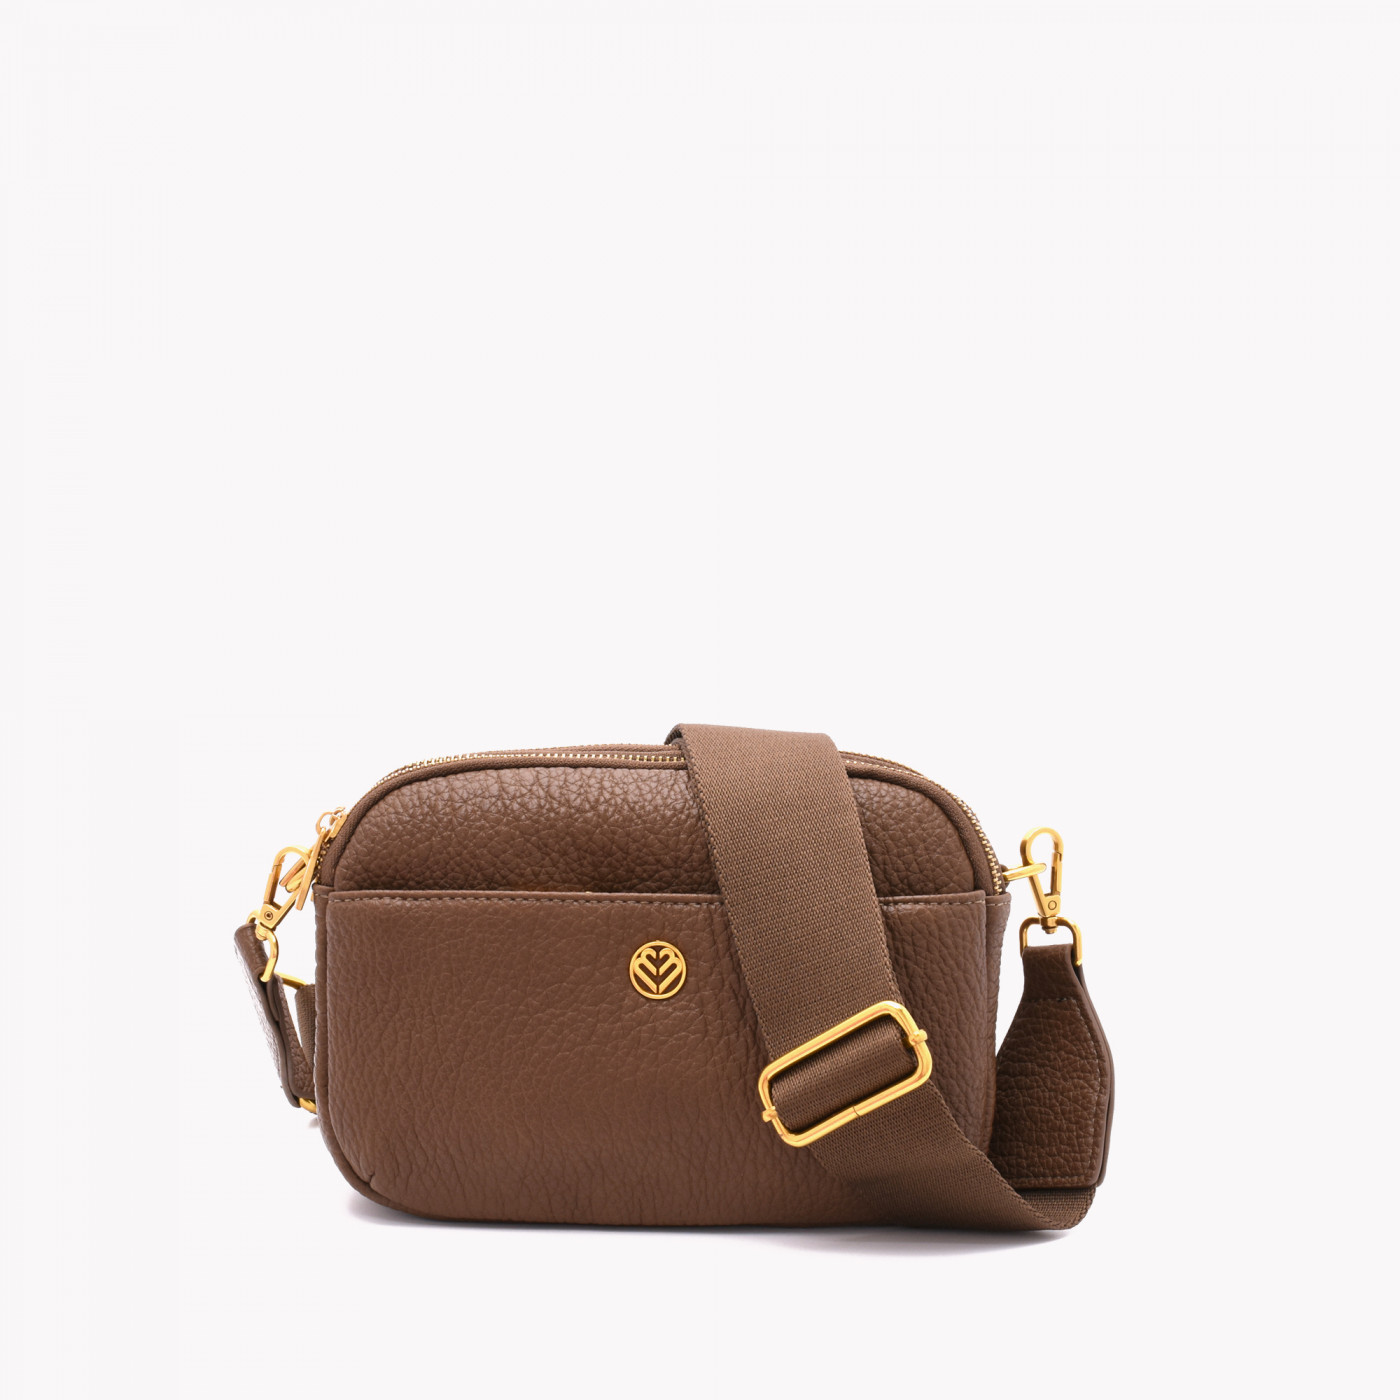 Salina | Women's crossbody bag in leather color chocolate – Il Bisonte